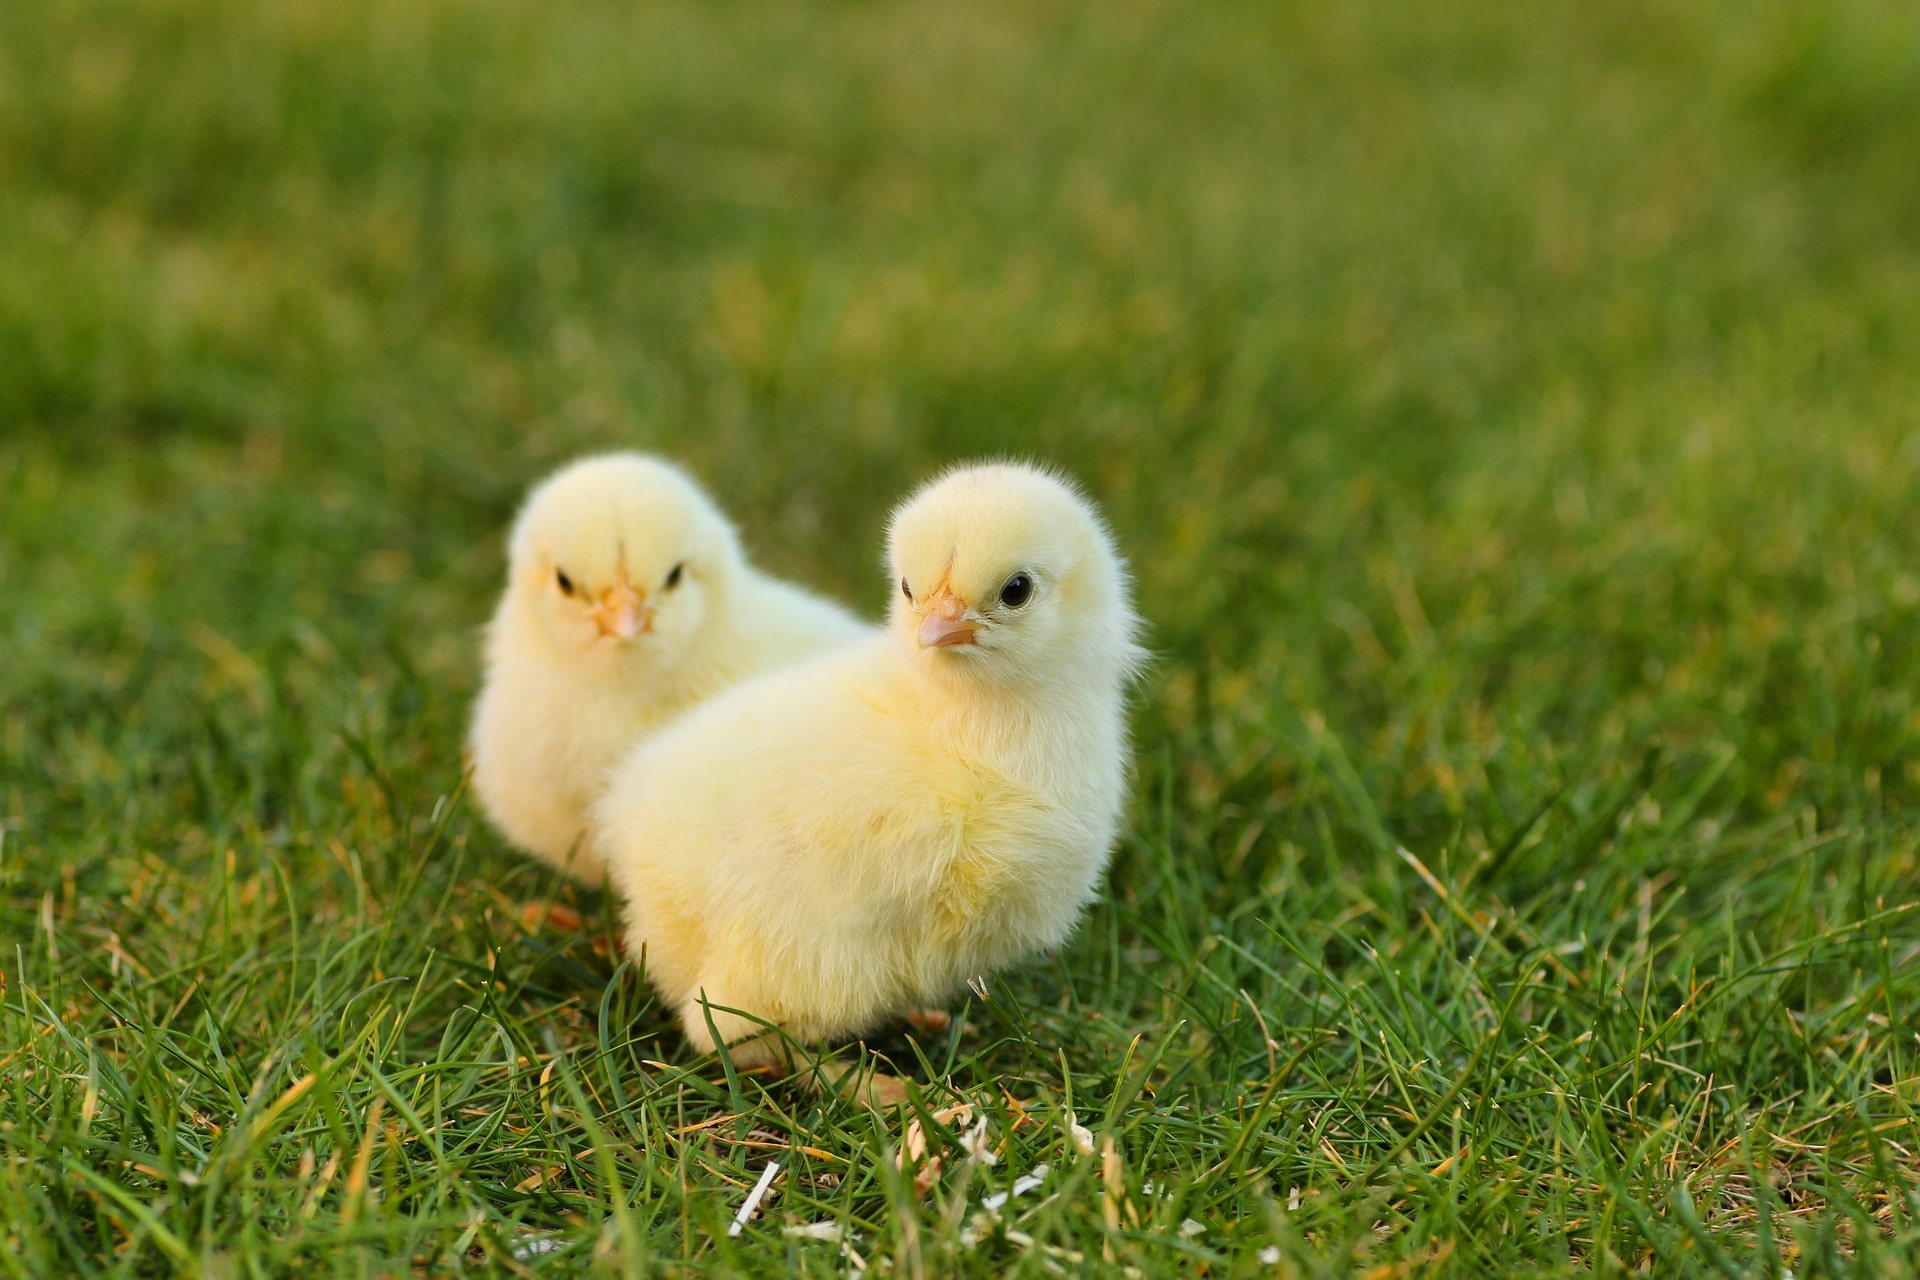 Two chicks stood together outside